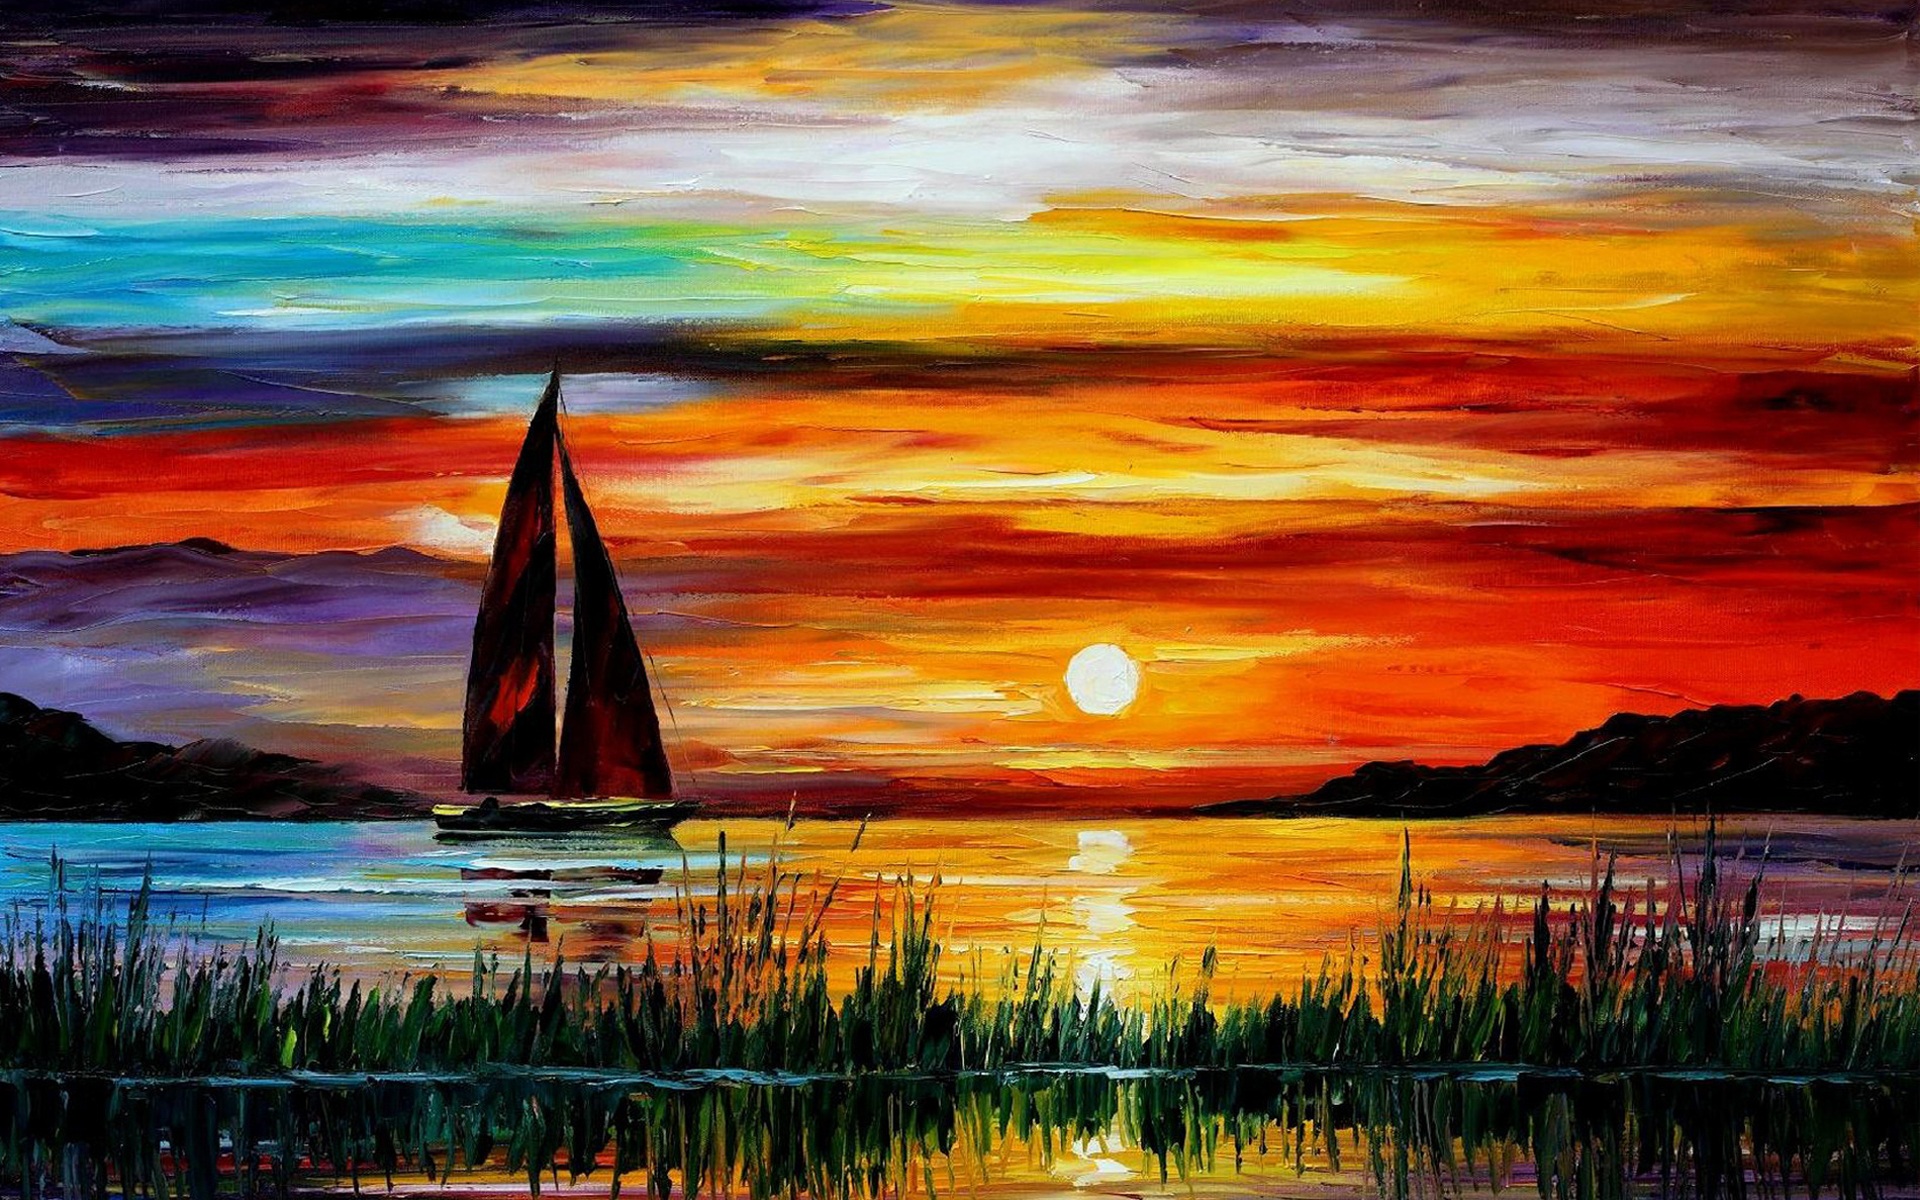 Exquisite painting wallpaper, sunset sea boat